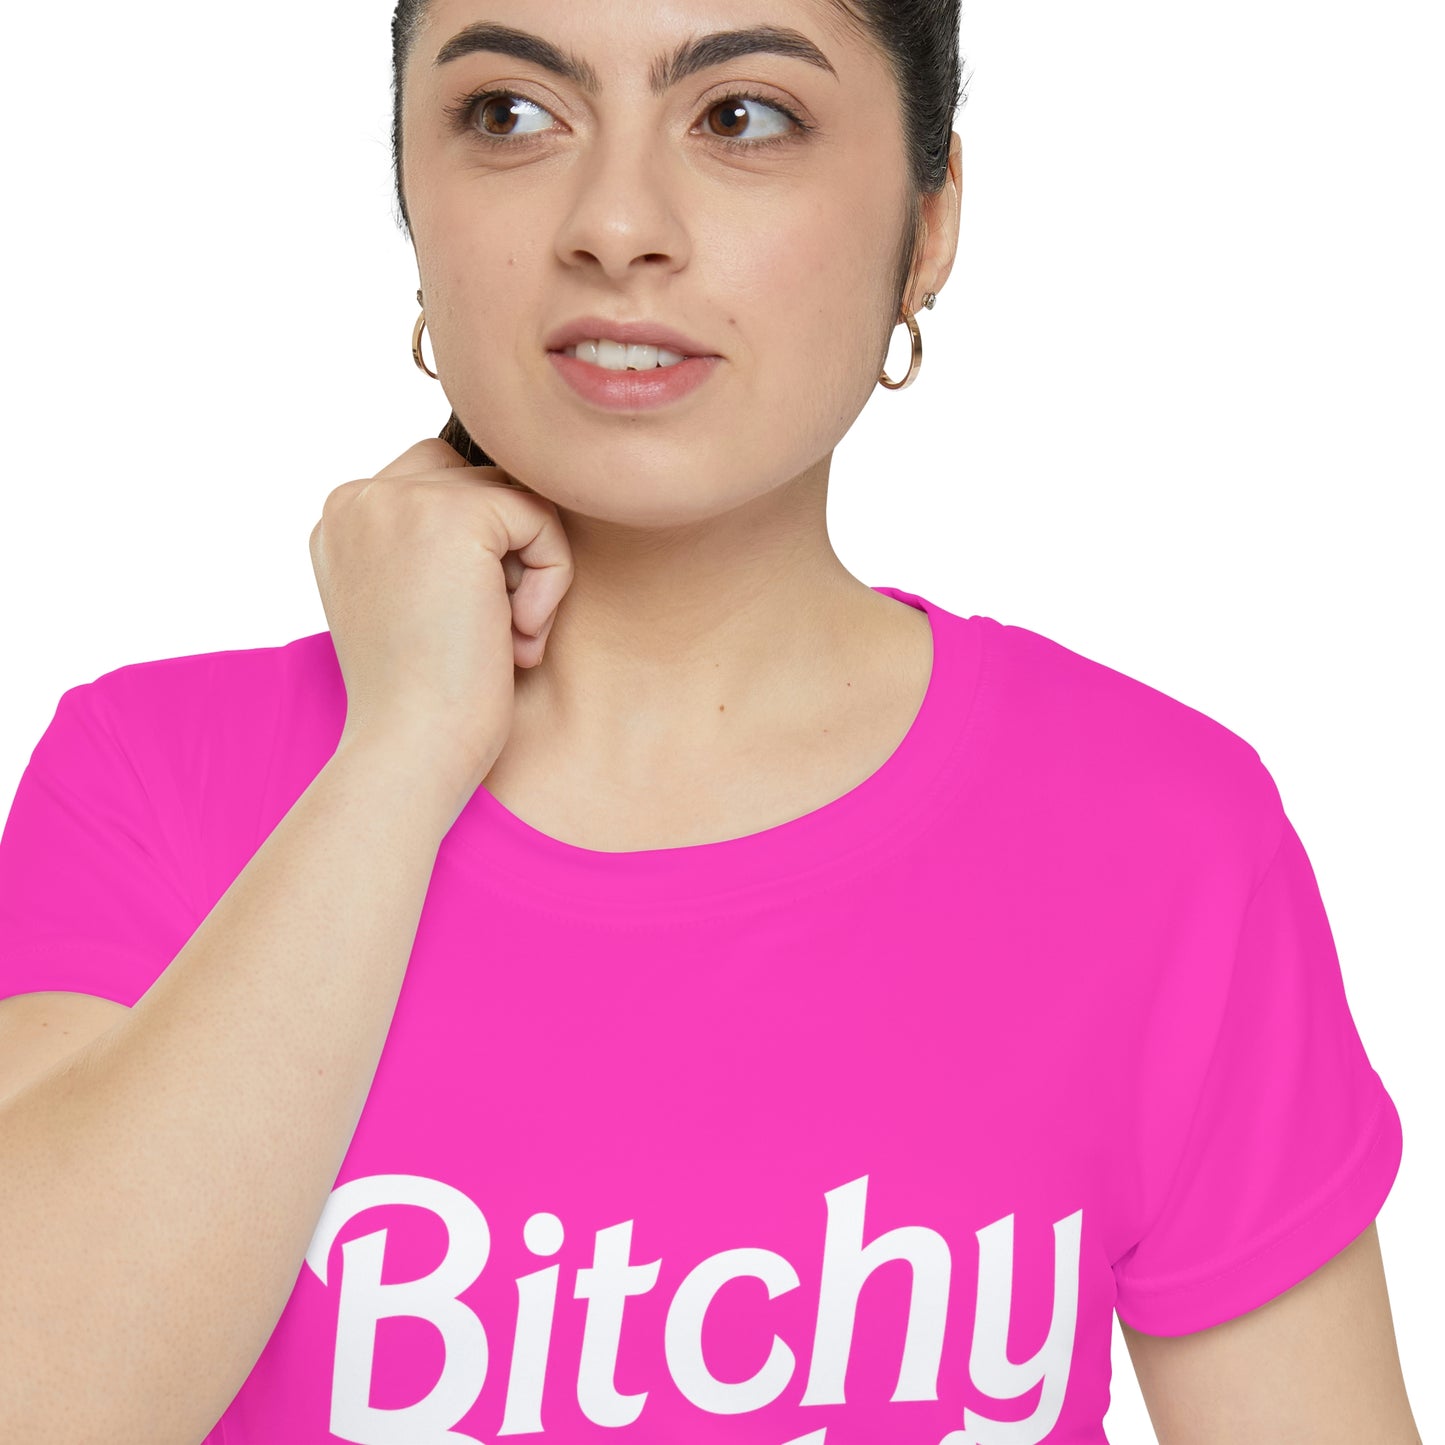 Bitchy Barbie, Bachelorette Party Shirts, Bridesmaid Gifts, Here comes the Party Tees, Group Party Favor Shirts, Bridal Party Shirt for women